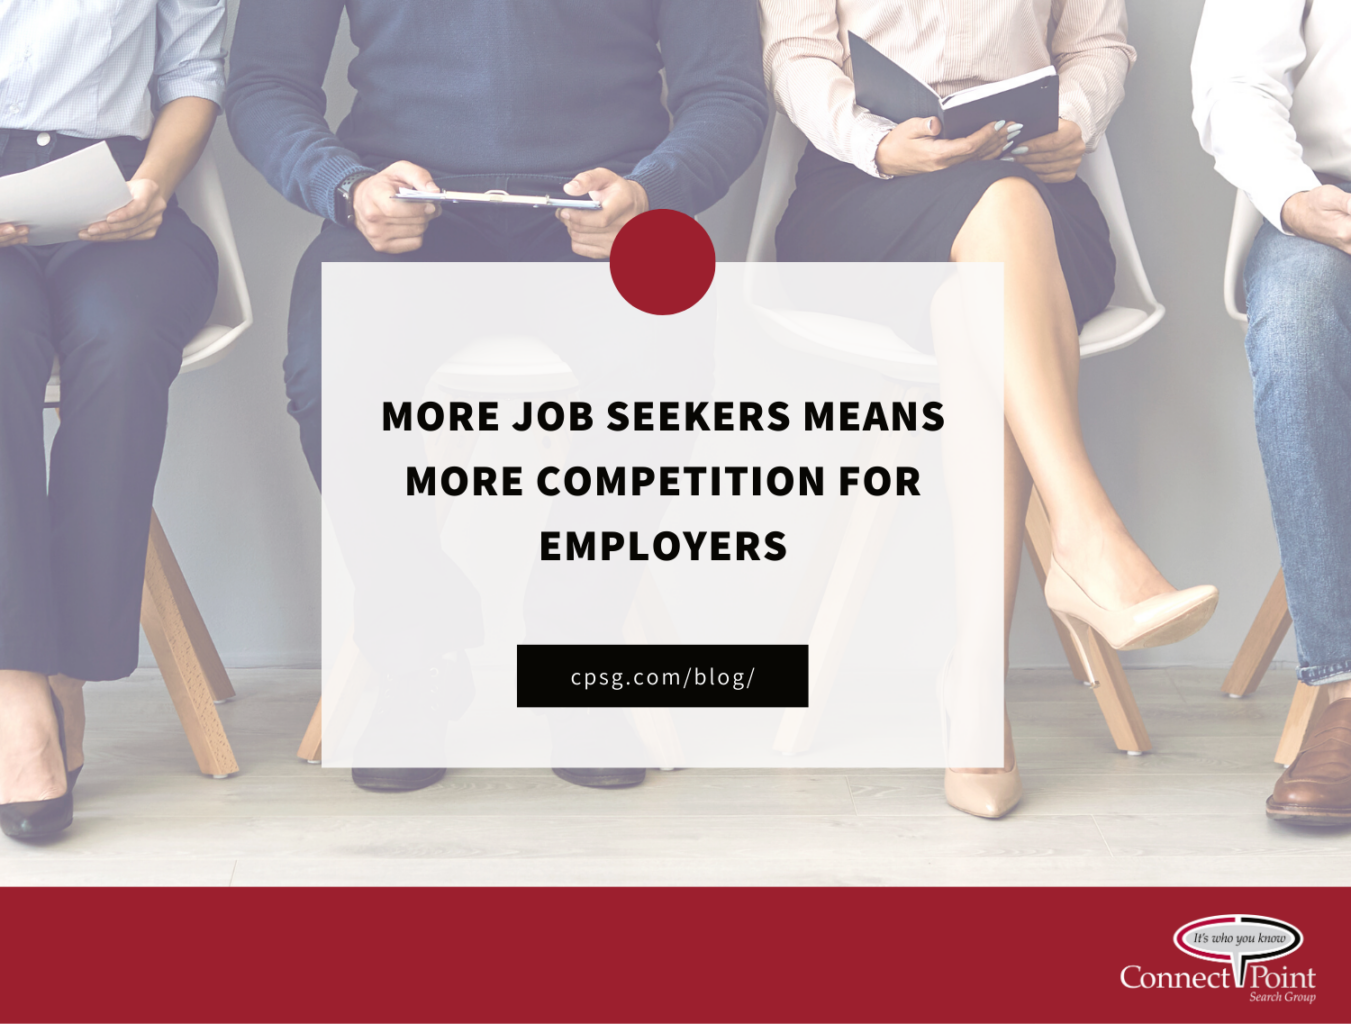 More Job Seekers Means More Competition for Employers